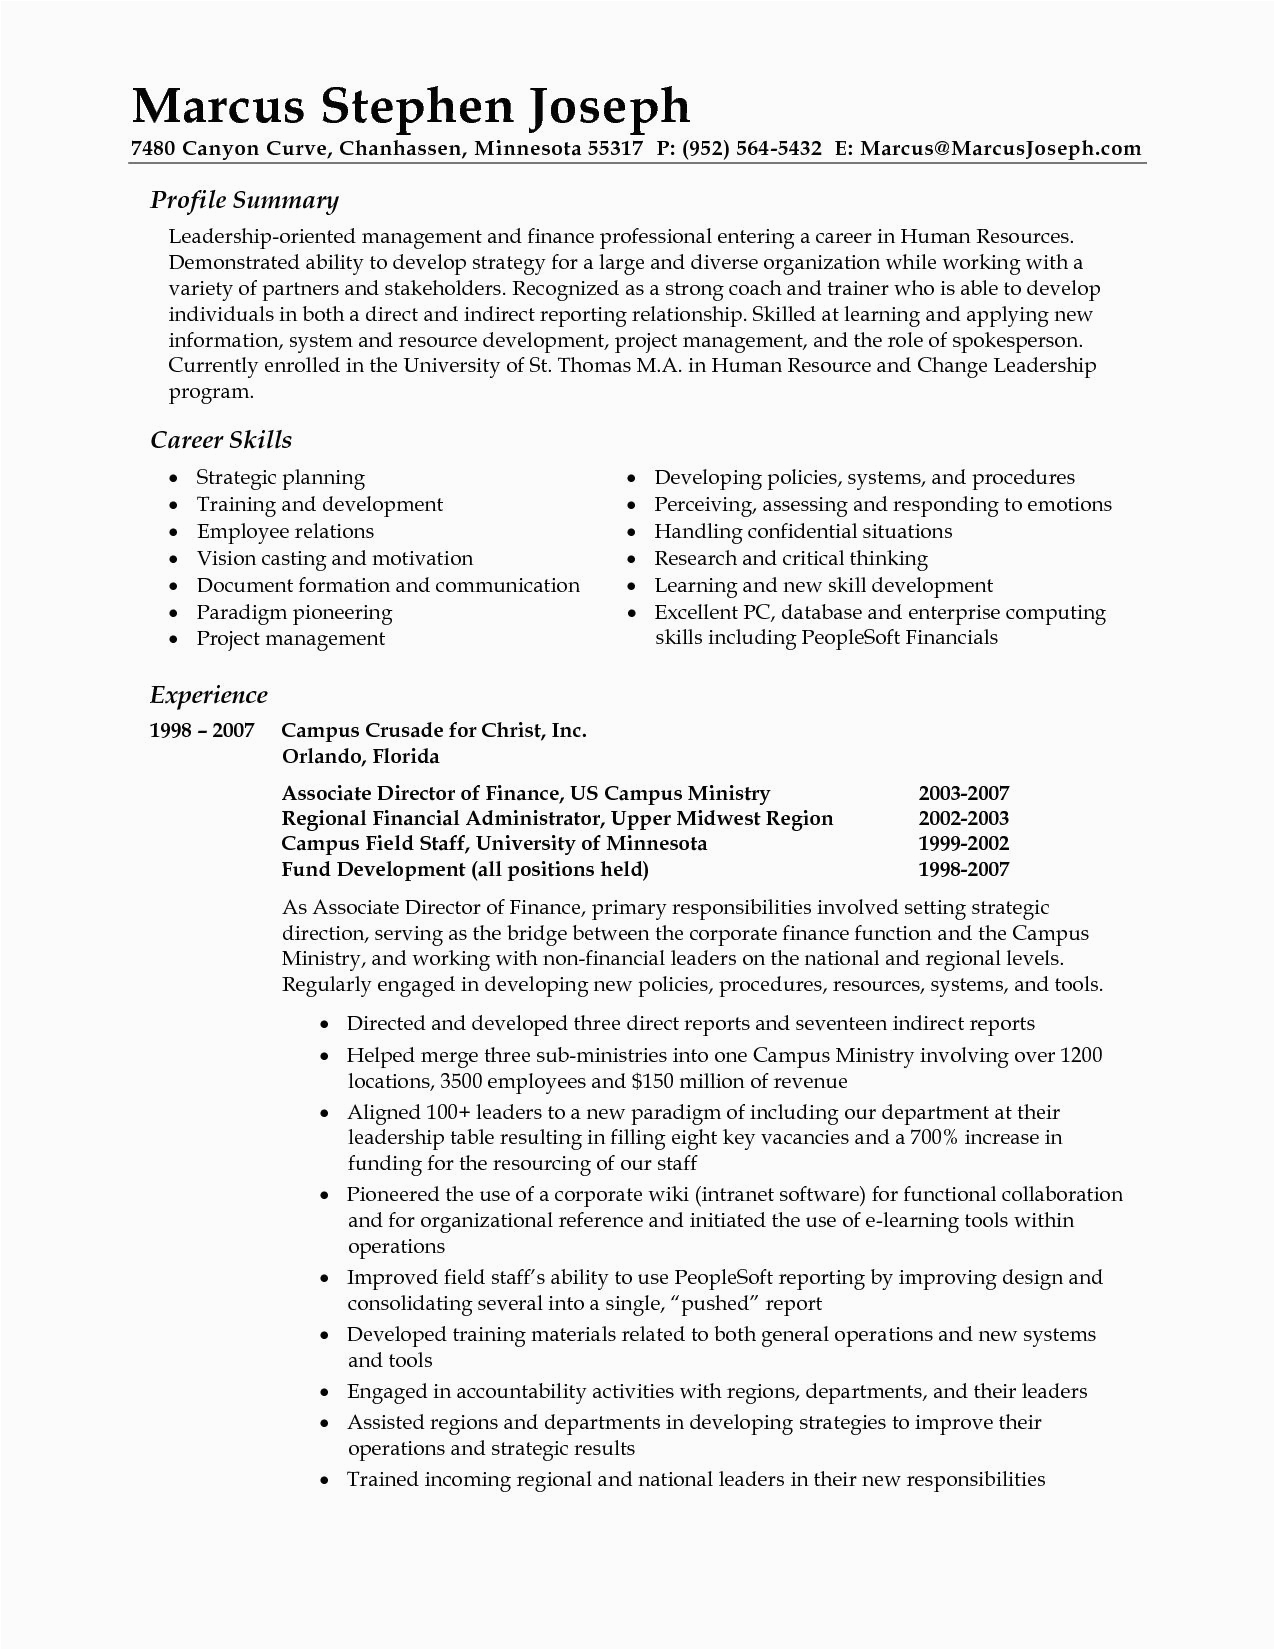 Samples Of A Good Summary for Resume Best Professional Summary Resume Examples